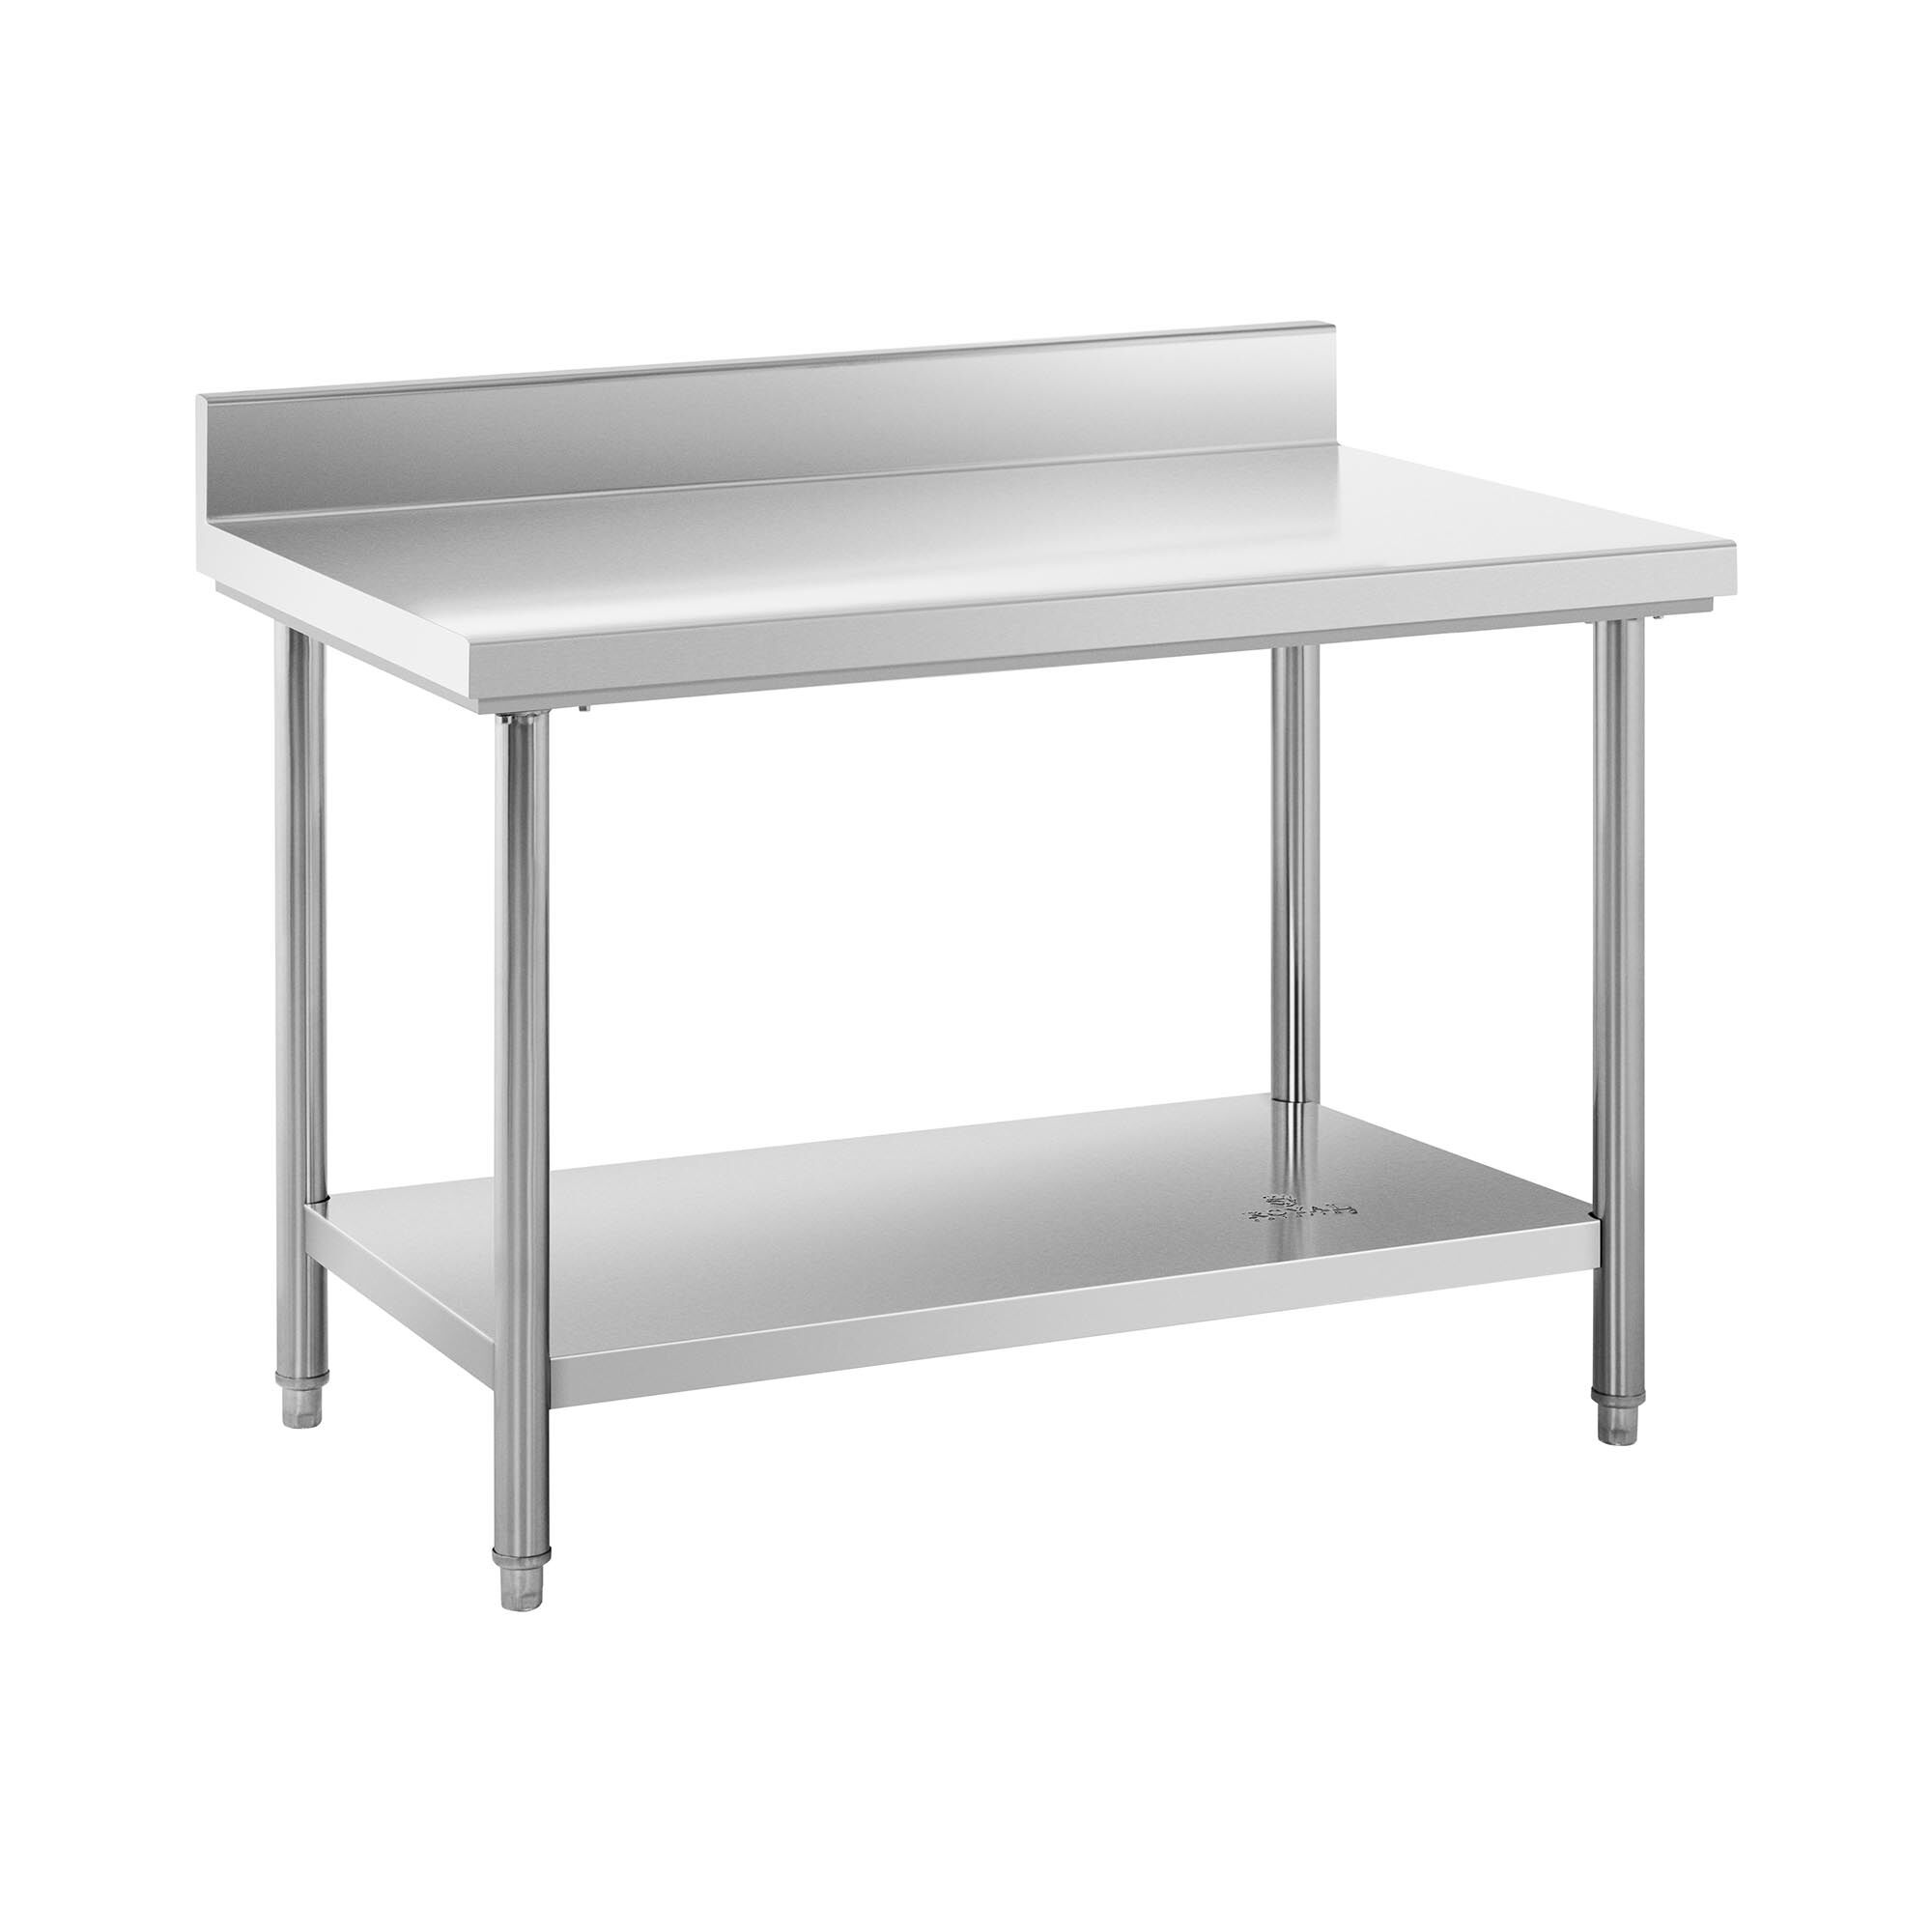 Royal Catering Stainless Steel Work Table - 120 x 70 cm - upstand - 143 kg capacity